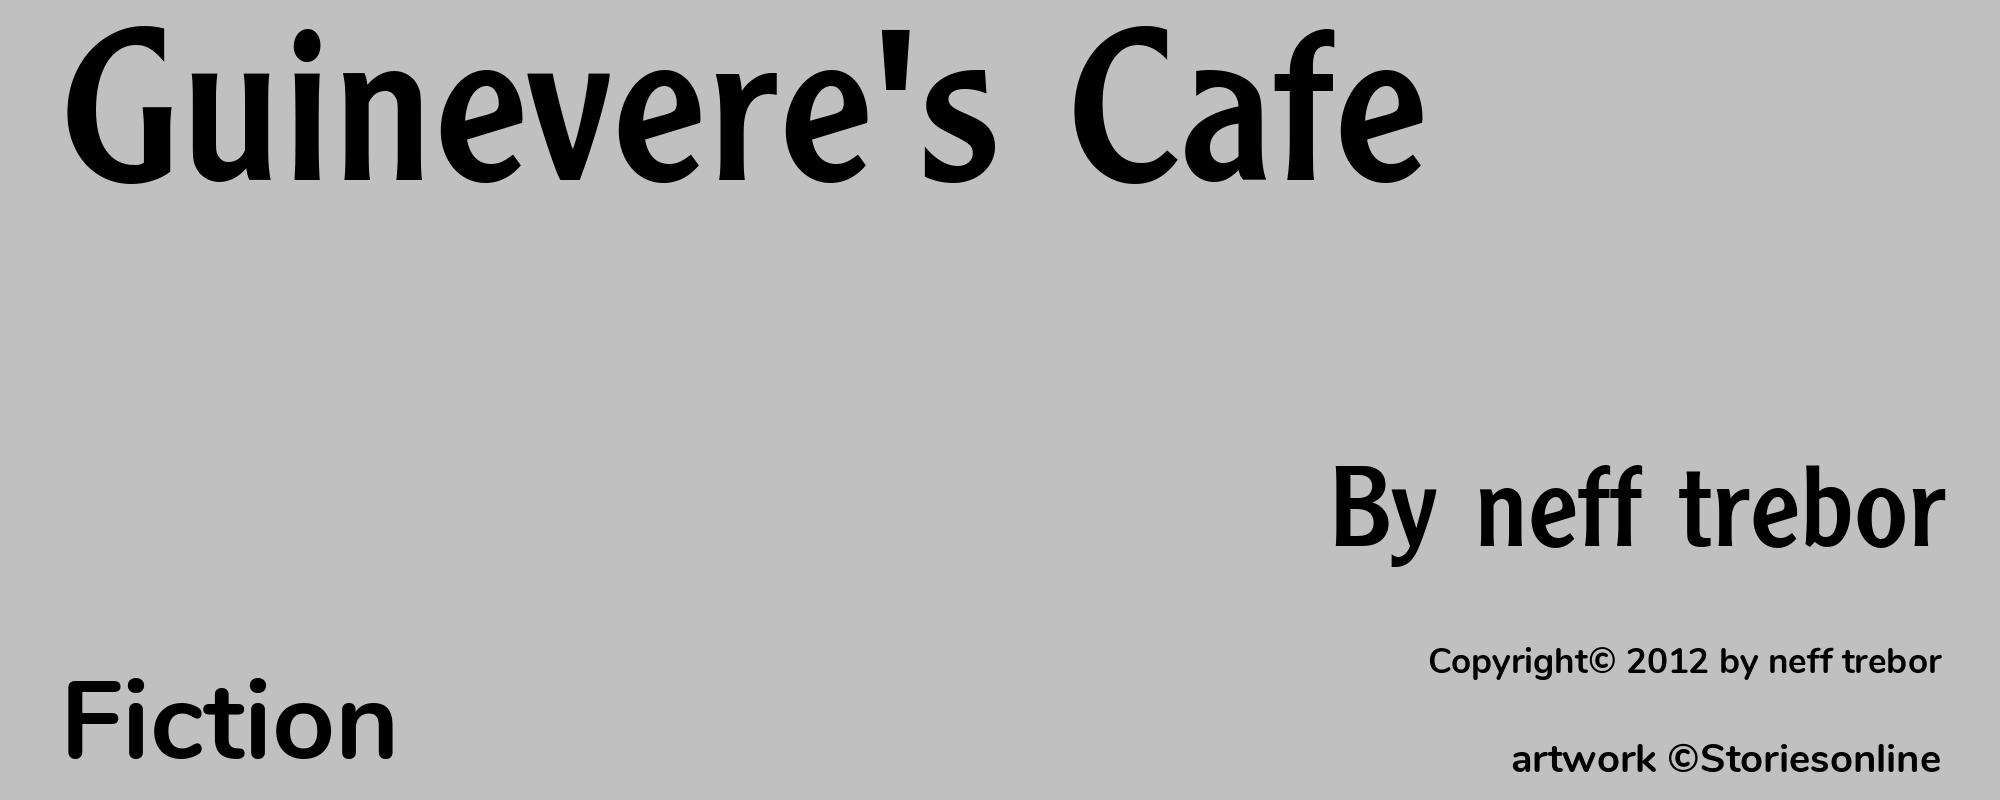 Guinevere's Cafe - Cover